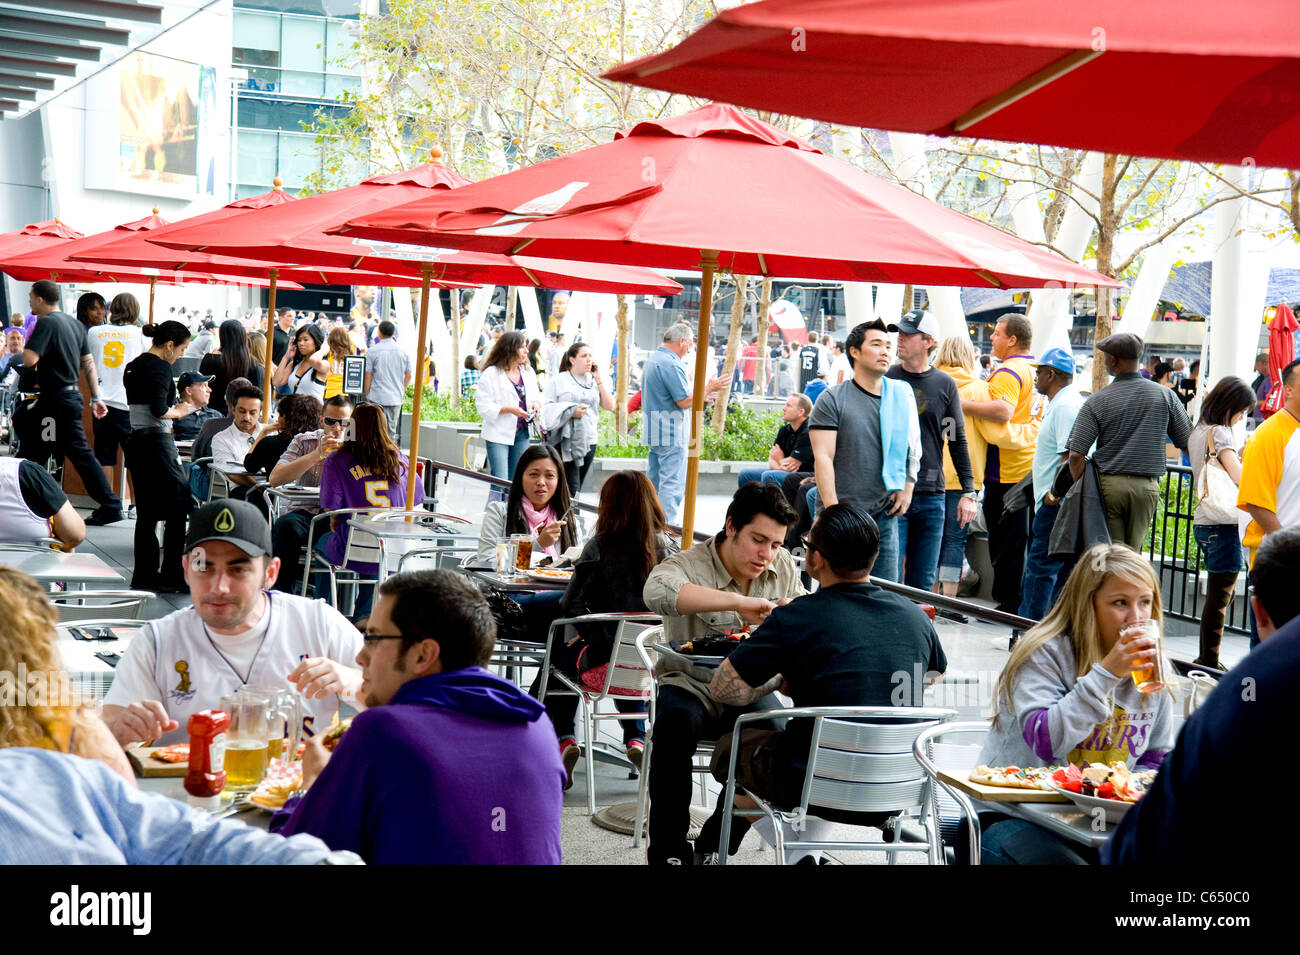 Outdoor cafe at L.A. Live complex in downtown Los Angeles Stock Photo